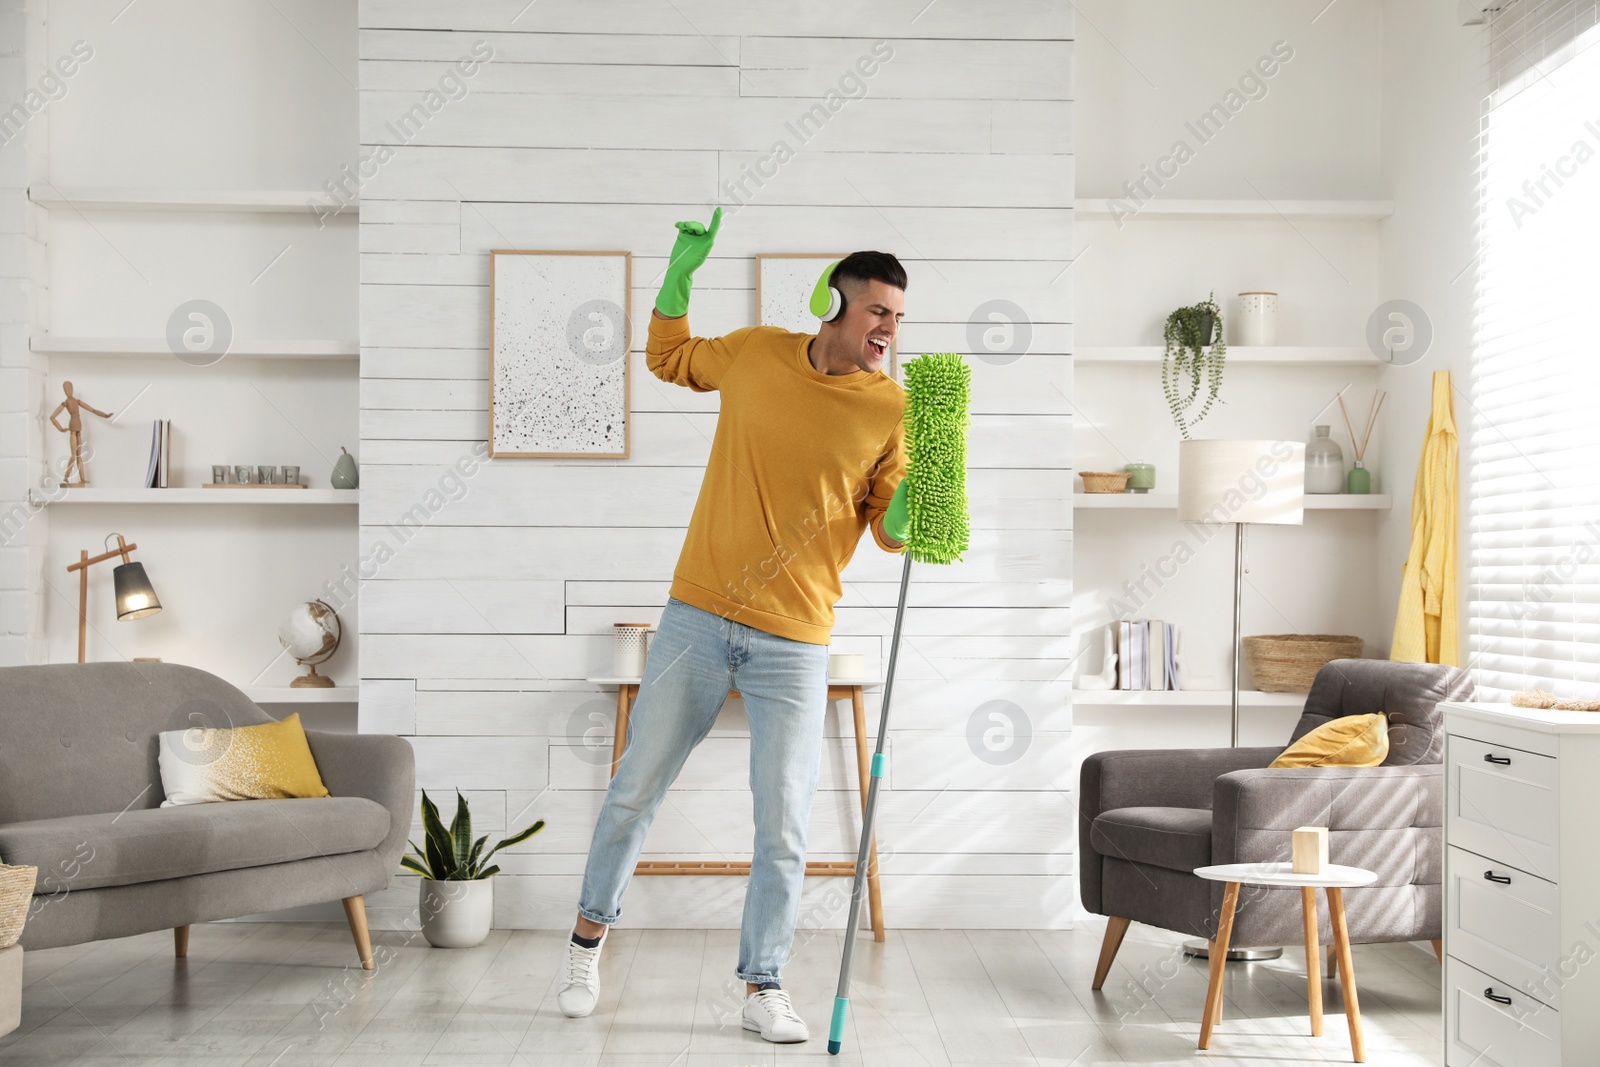 Photo of Man in headphones with mop singing while cleaning at home